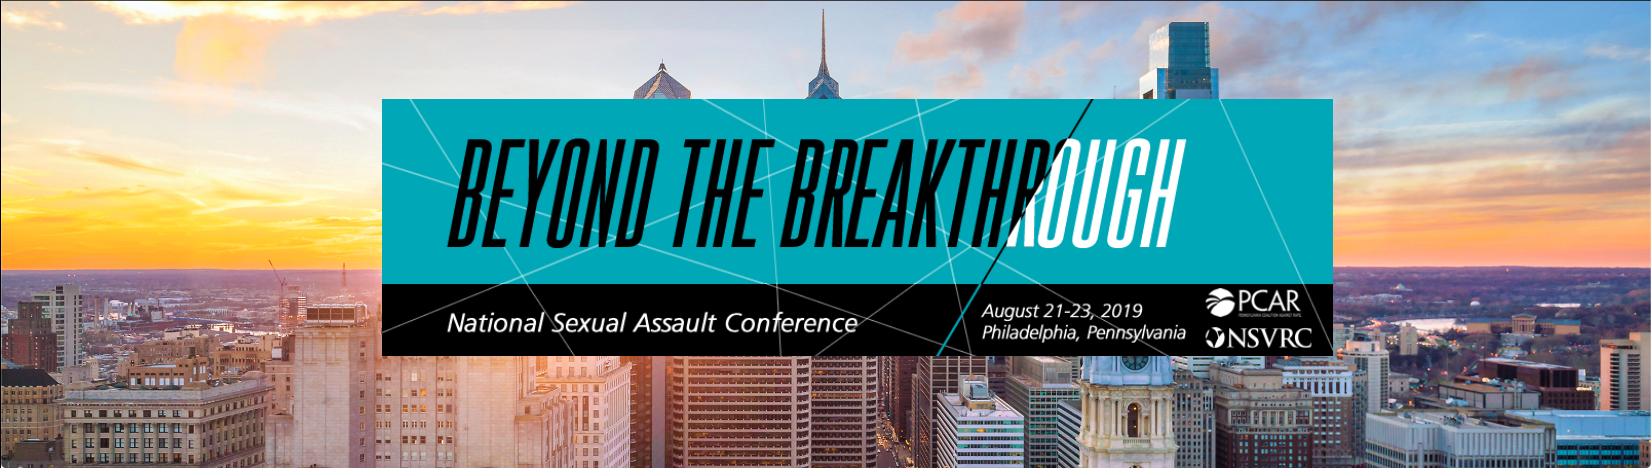 beyond the breakthrough image for the 2019 National Sexual Assault Conference